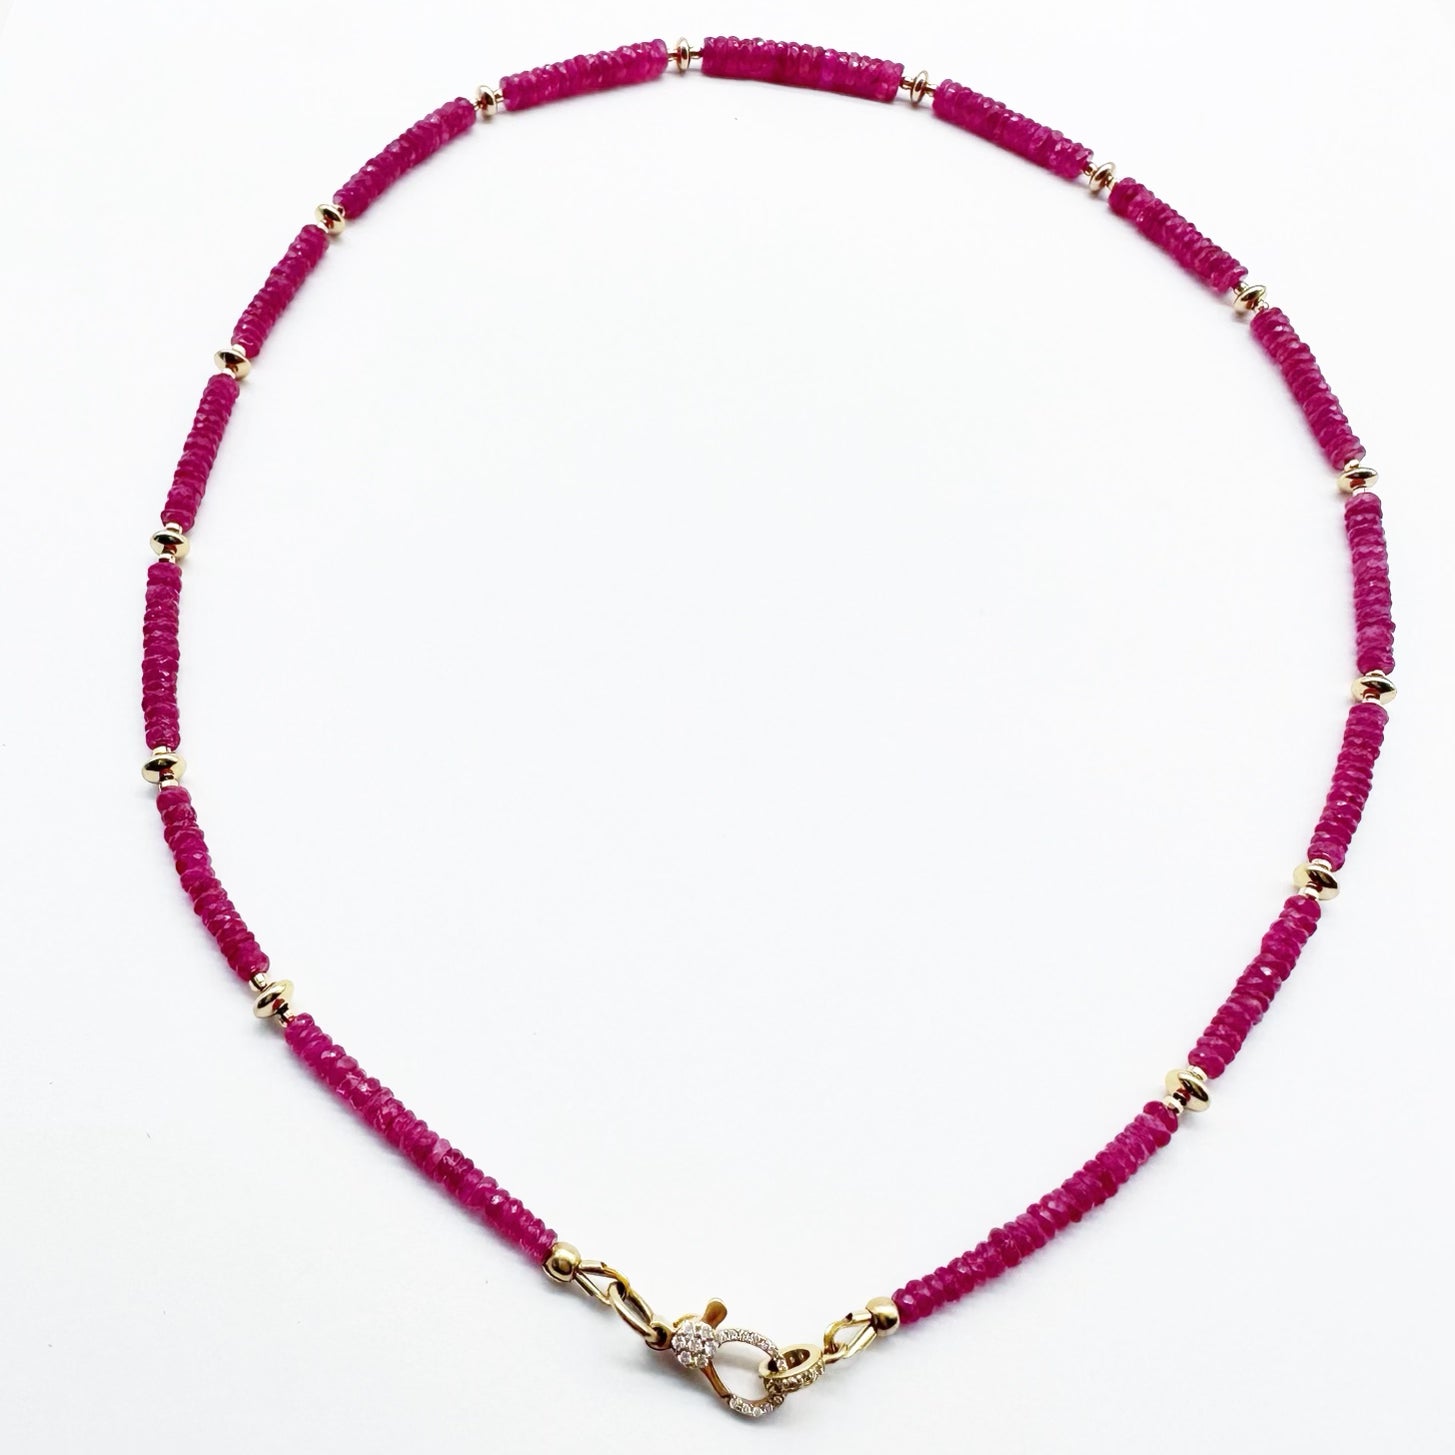 PINK SAPPHIRE NECKLACE WITH DIAMOND CLASP